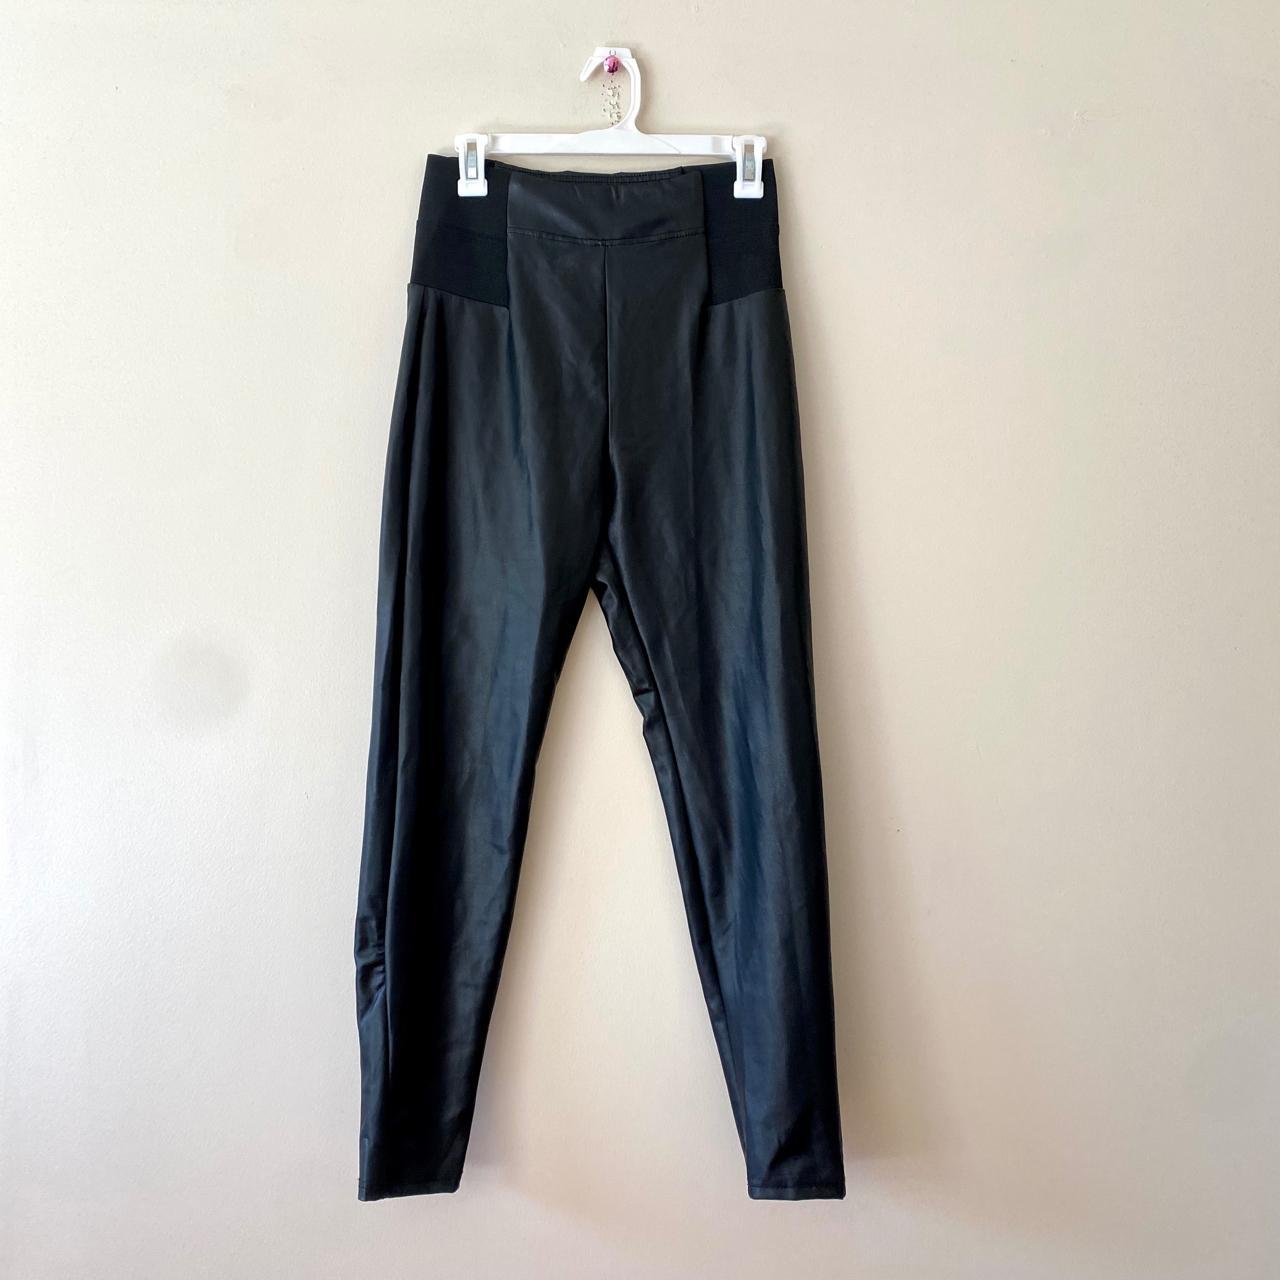 Target brand A New Day Faux Leather Leggings. Black... - Depop